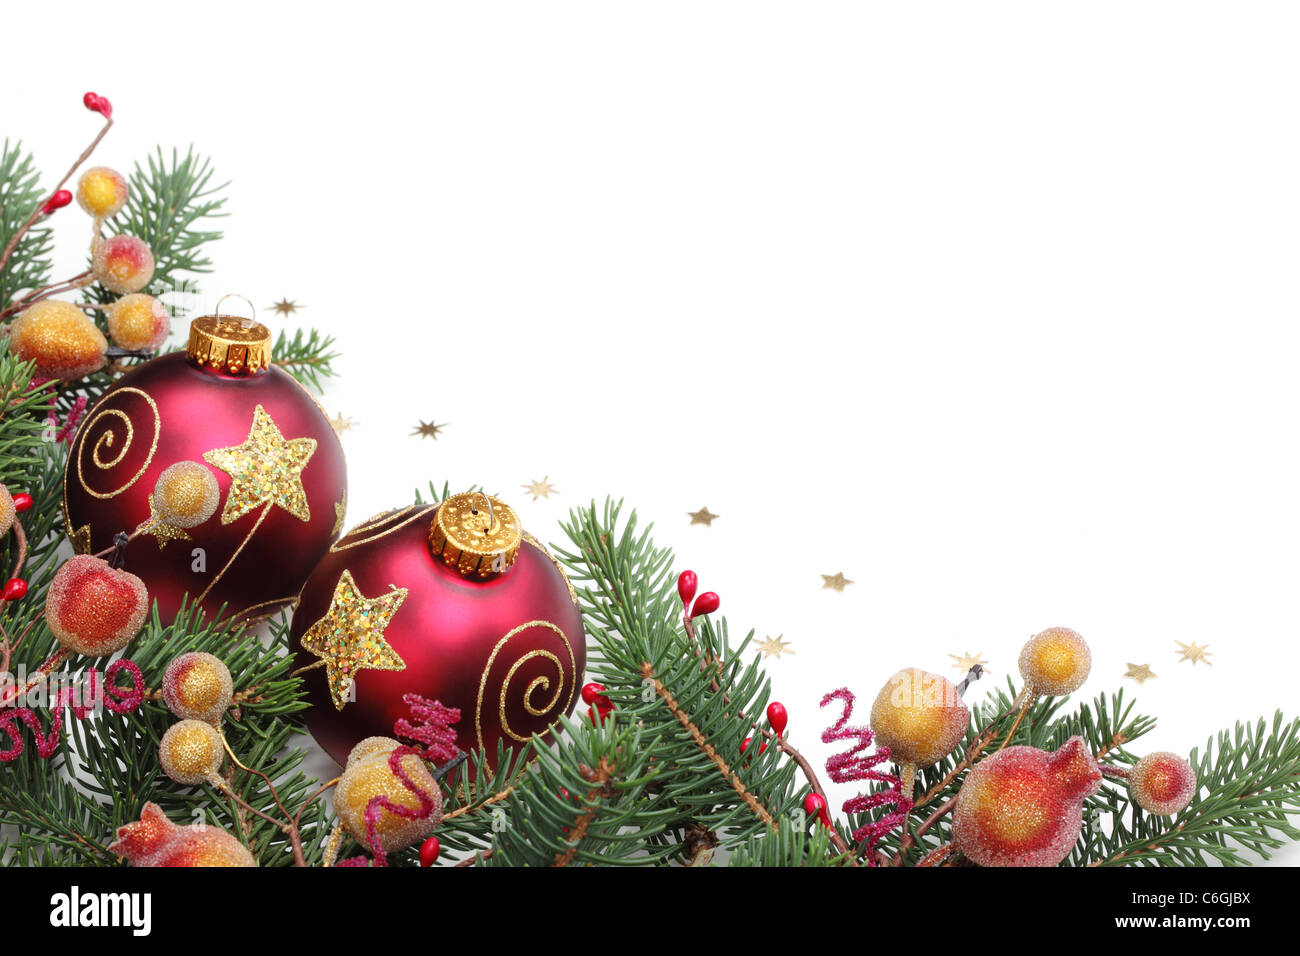 Pine branches,berries and balls for Christmas border. Stock Photo